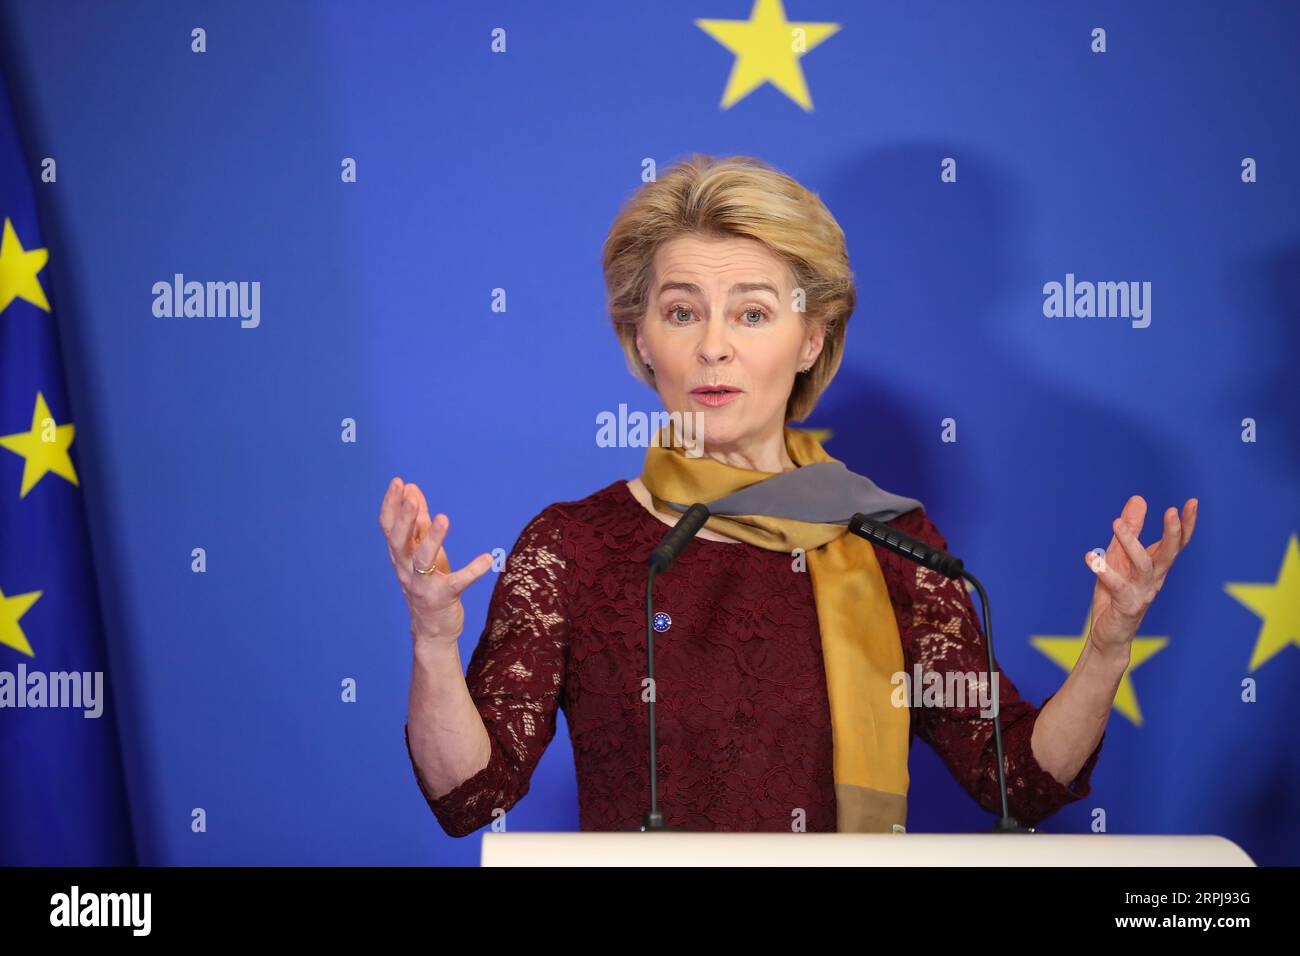 191201 -- BRUSSELS, Dec. 1, 2019 -- European Commission President Ursula von der Leyen delivers a speech during a ceremony to mark the 10th anniversary of the entry into force of the Lisbon Treaty, at the House of European History in Brussels, Belgium, Dec. 1, 2019.  BELGIUM-BRUSSELS-LISBON TREATY-10TH ANNIVERSARY ZhangxCheng PUBLICATIONxNOTxINxCHN Stock Photo